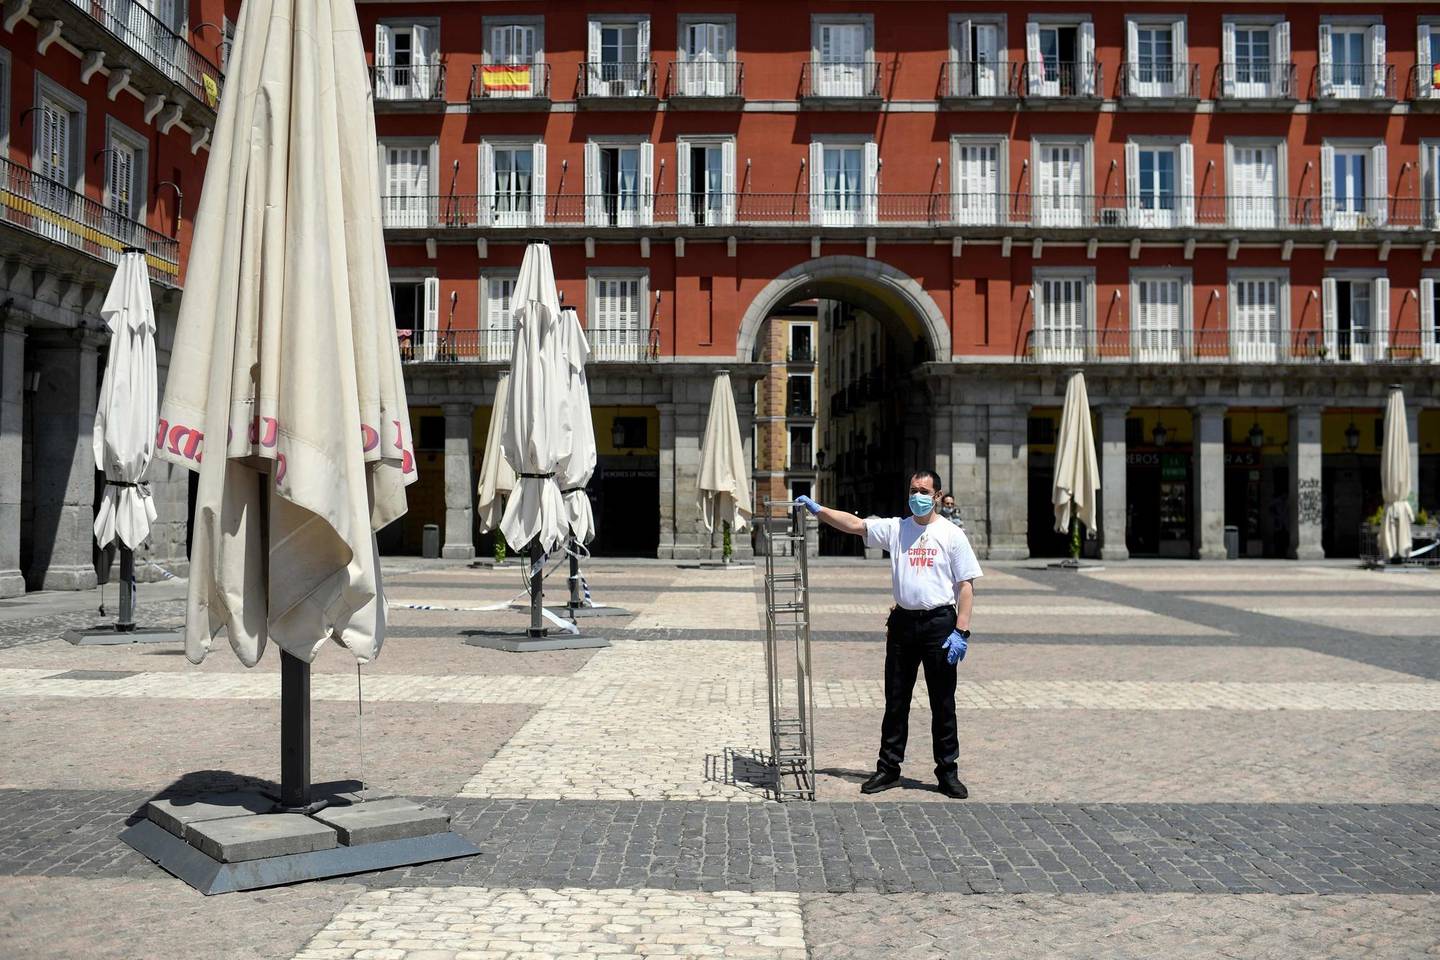 An employee sets up the outdoor seating area of a restaurant on the eve of its reopening at Plaza Mayor in Madrid on May 24, 2020 as the country slowly loosens a strict coronavirus lockdown. (Photo by OSCAR DEL POZO / AFP)